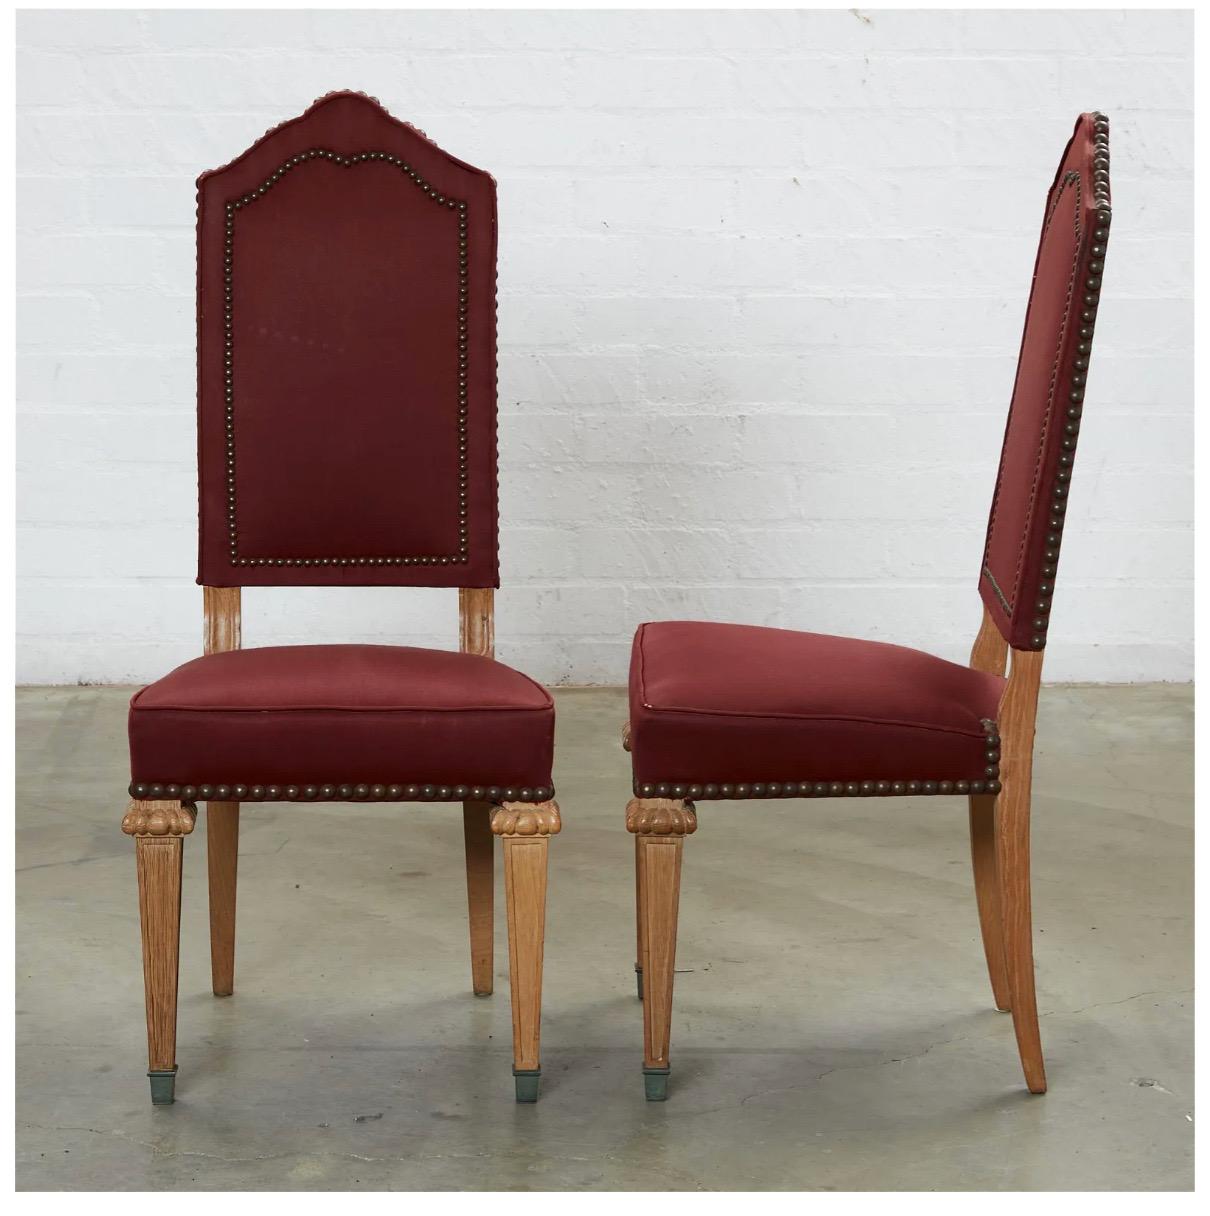 This is a very good set of 8 French Oak Baroque-Style dining chairs that date to the second half of the 20th century. All 8 chairs are in very good condition as is the deep wine-toned upholstery. The upholstery is well-detailed in patinated brass